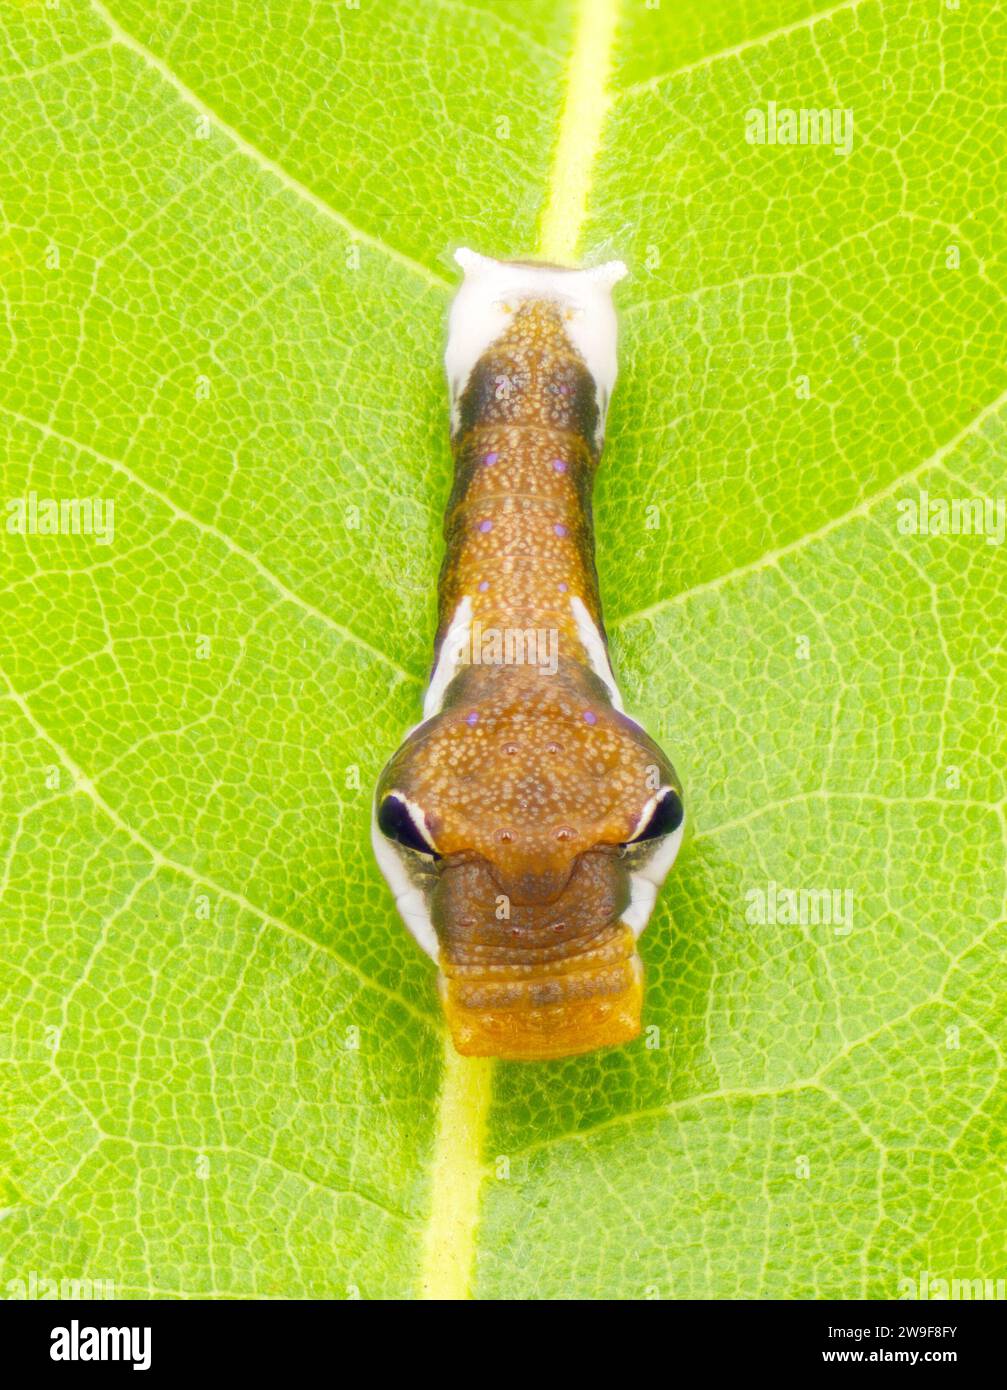 Palamedes Swallowtail butterfly - Papilio palamedes - 2nd or 3rd instar  on host plant leaf of Franklinia Gordonia lasianthus - Loblolly Bay tree. Iso Stock Photo